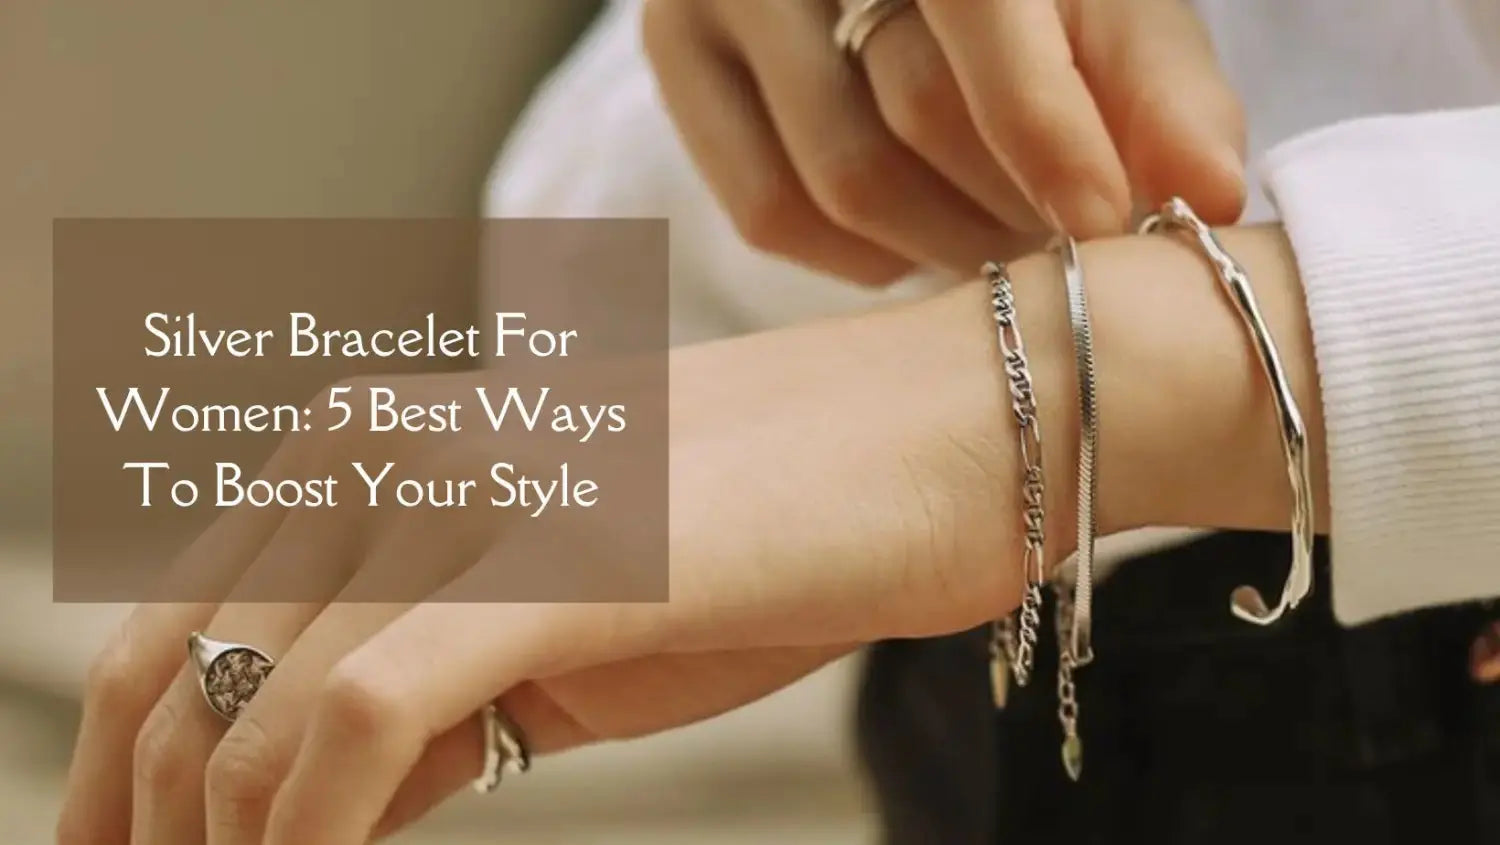 Enhance Your Casual Look With A Dazzling Chain Bracelet